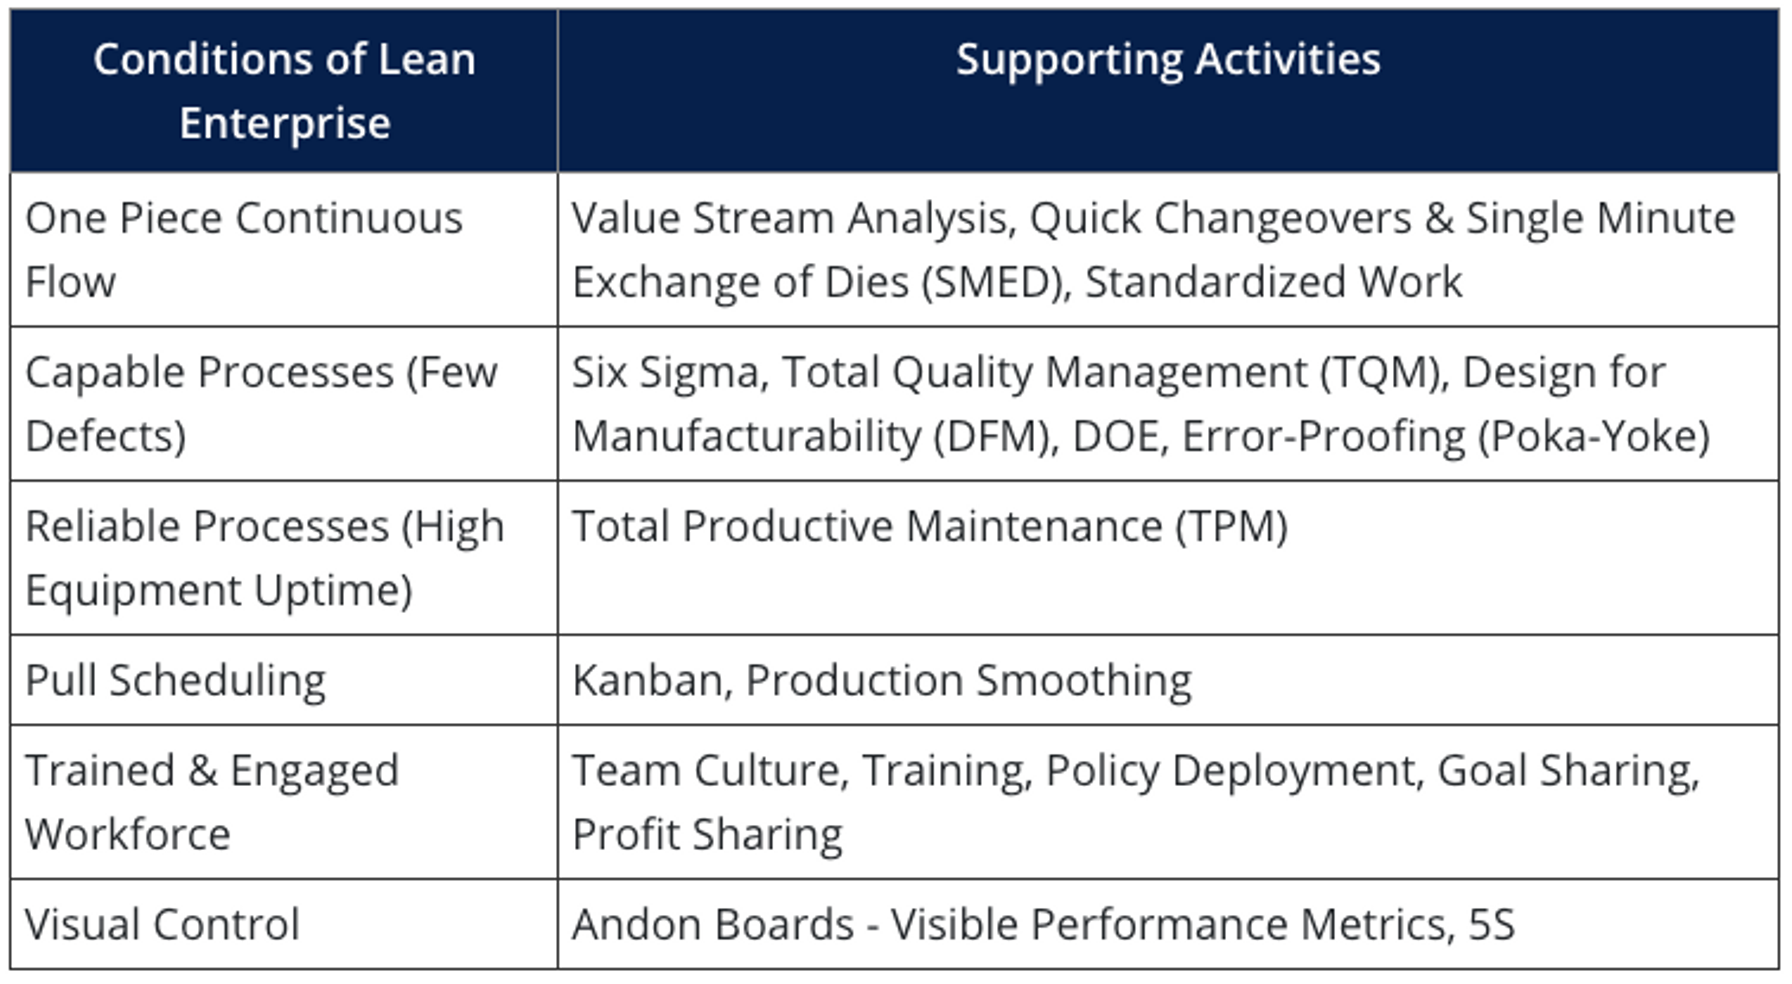 Lean Conditions/Supporting Activities Table